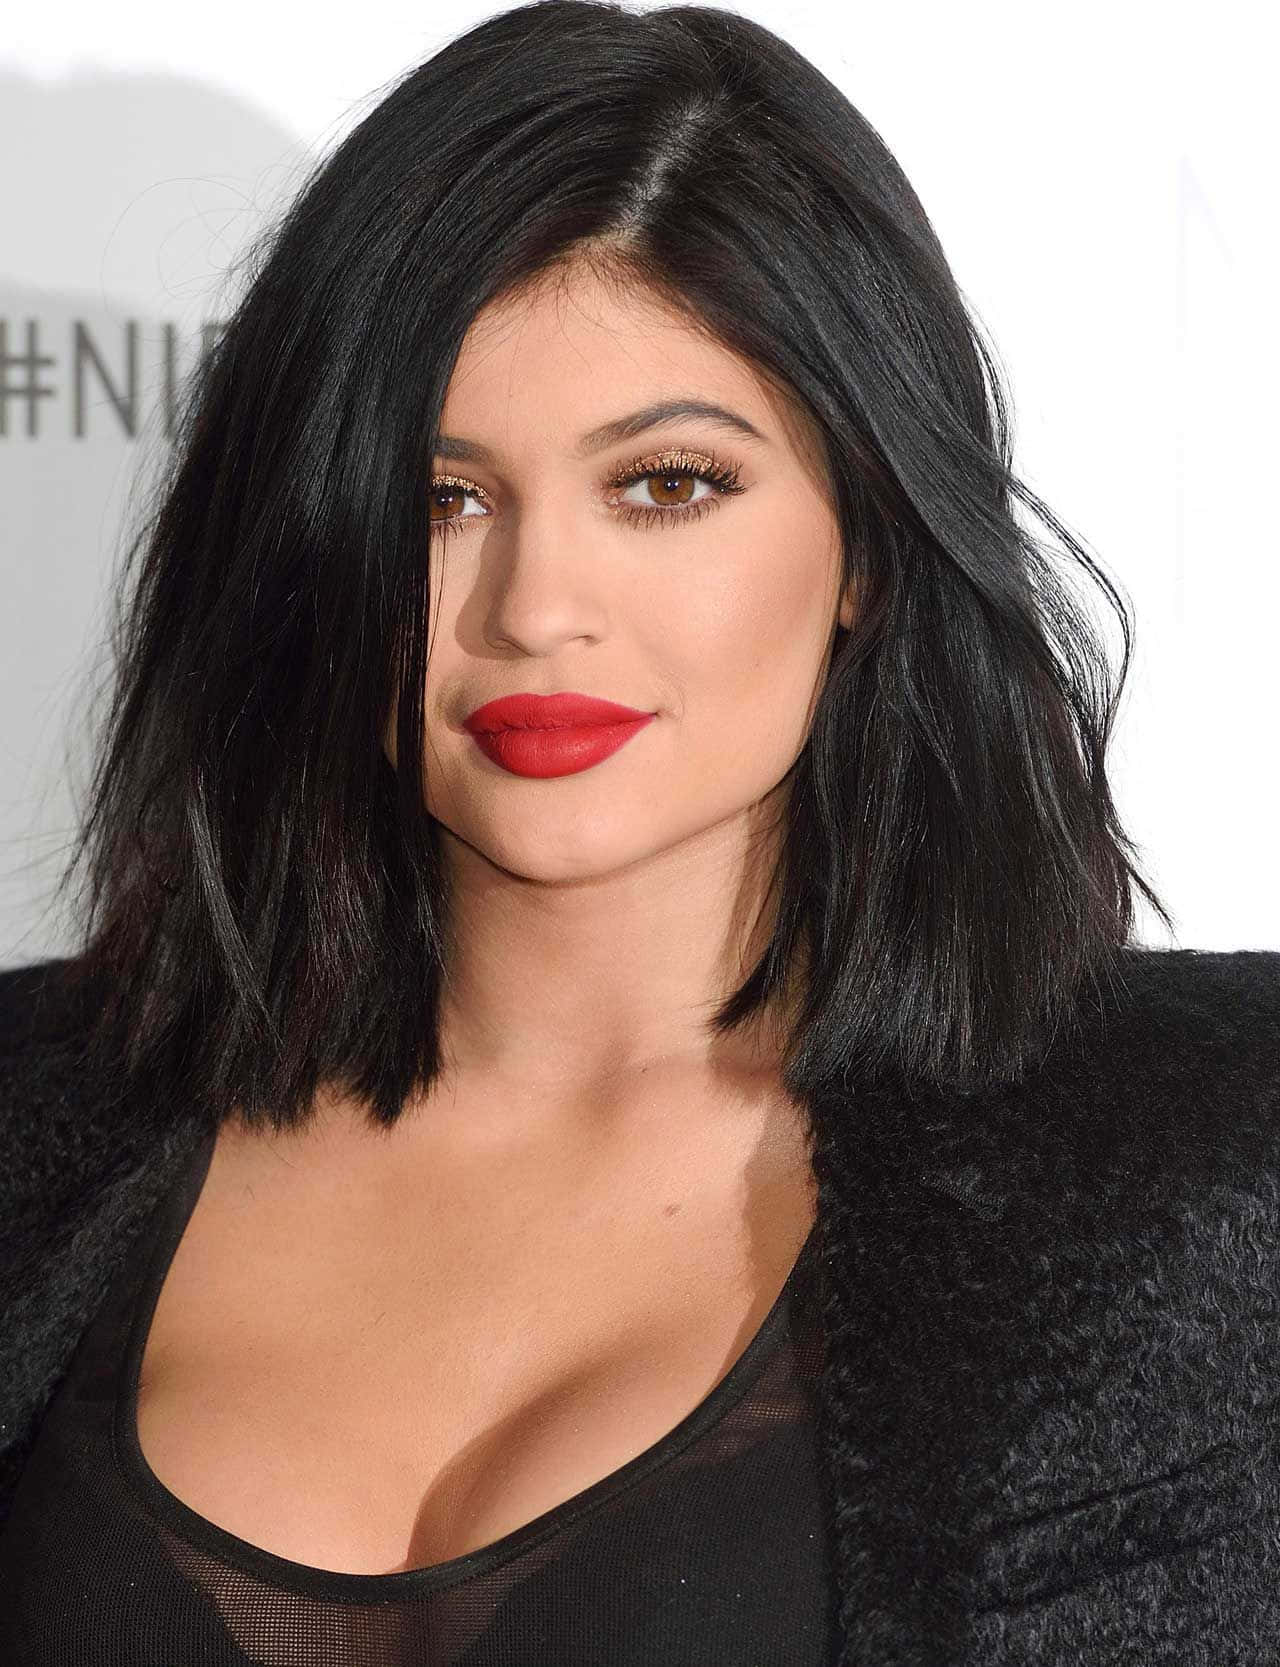 Beauty and glamour come easy to Kylie Jenner